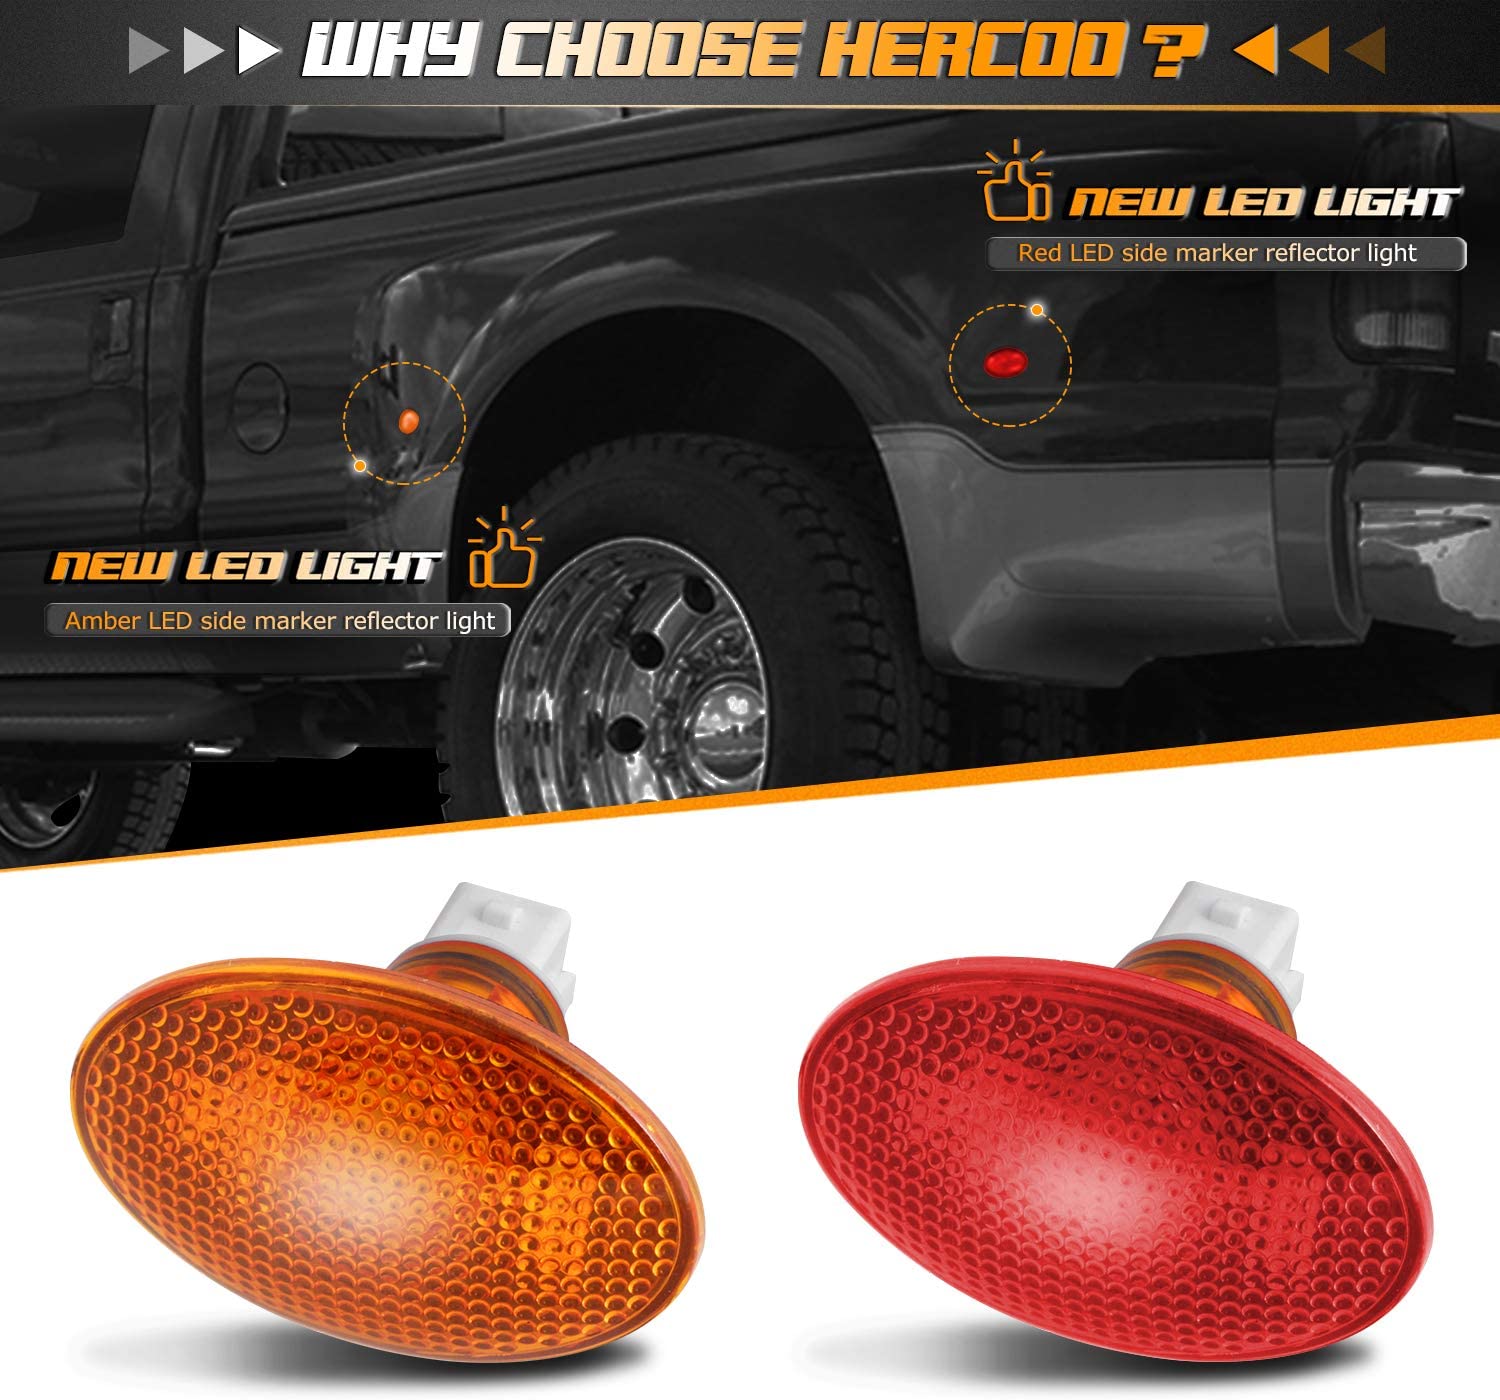 HERCOO Dually Bed Fender LED Side Marker Lights Front Rear Lamps Compatible with Ford 1999-2010 F350 F450 F550 Super Duty, Smoke